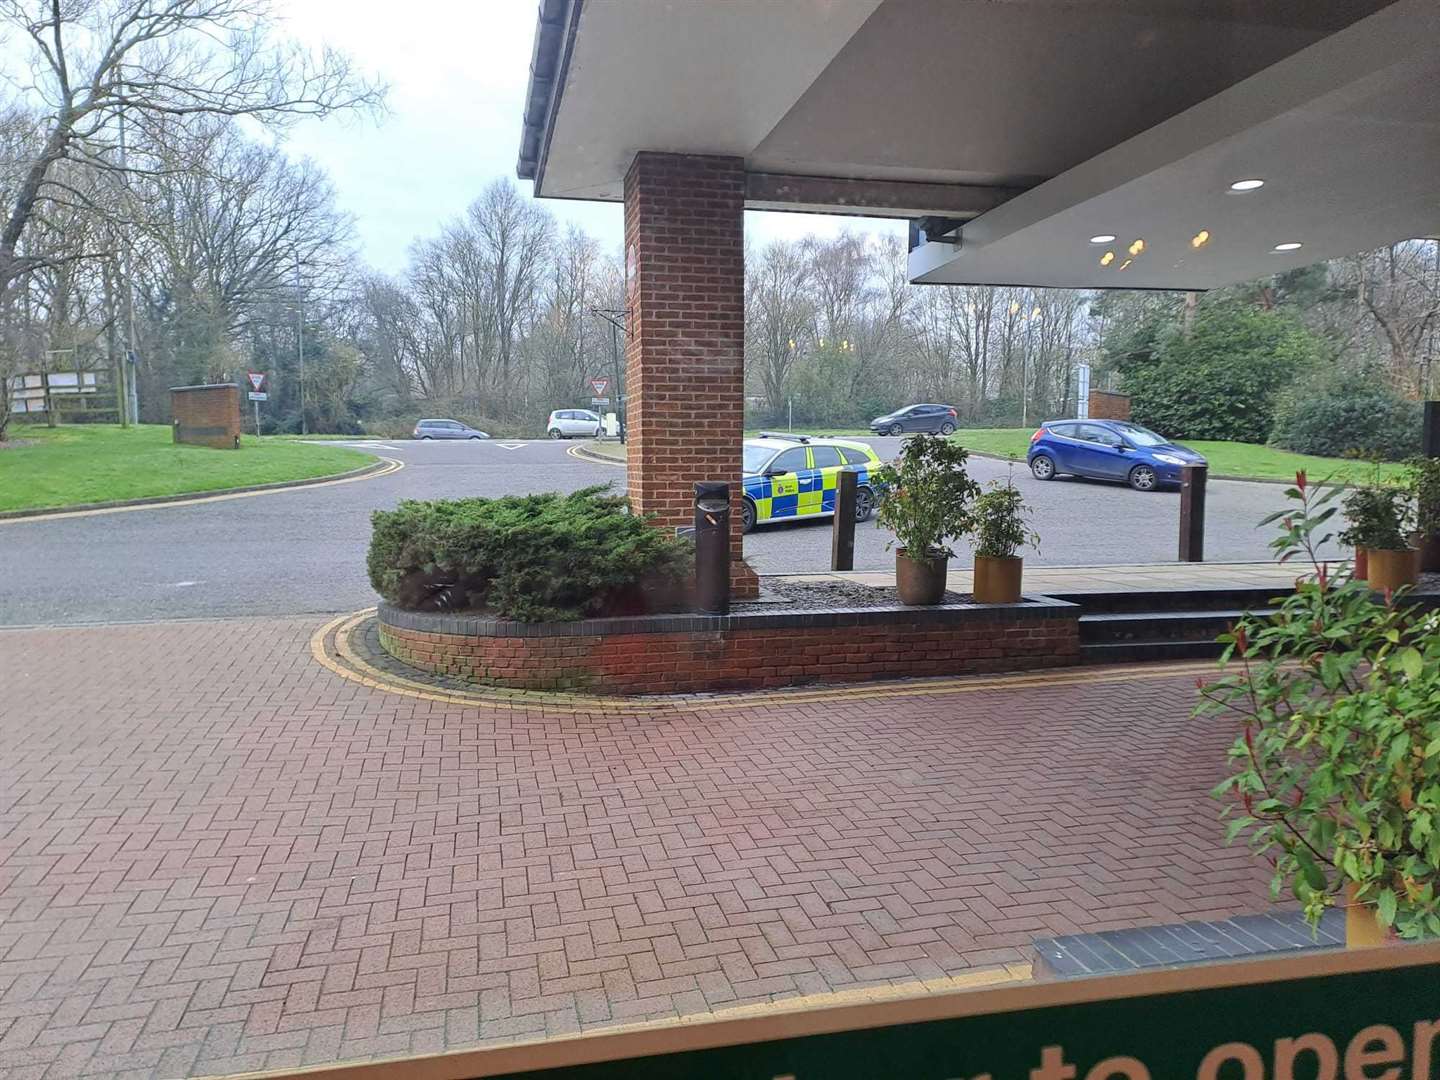 Police were called to Ashford International Hotel after a person collapsed and died at the scene